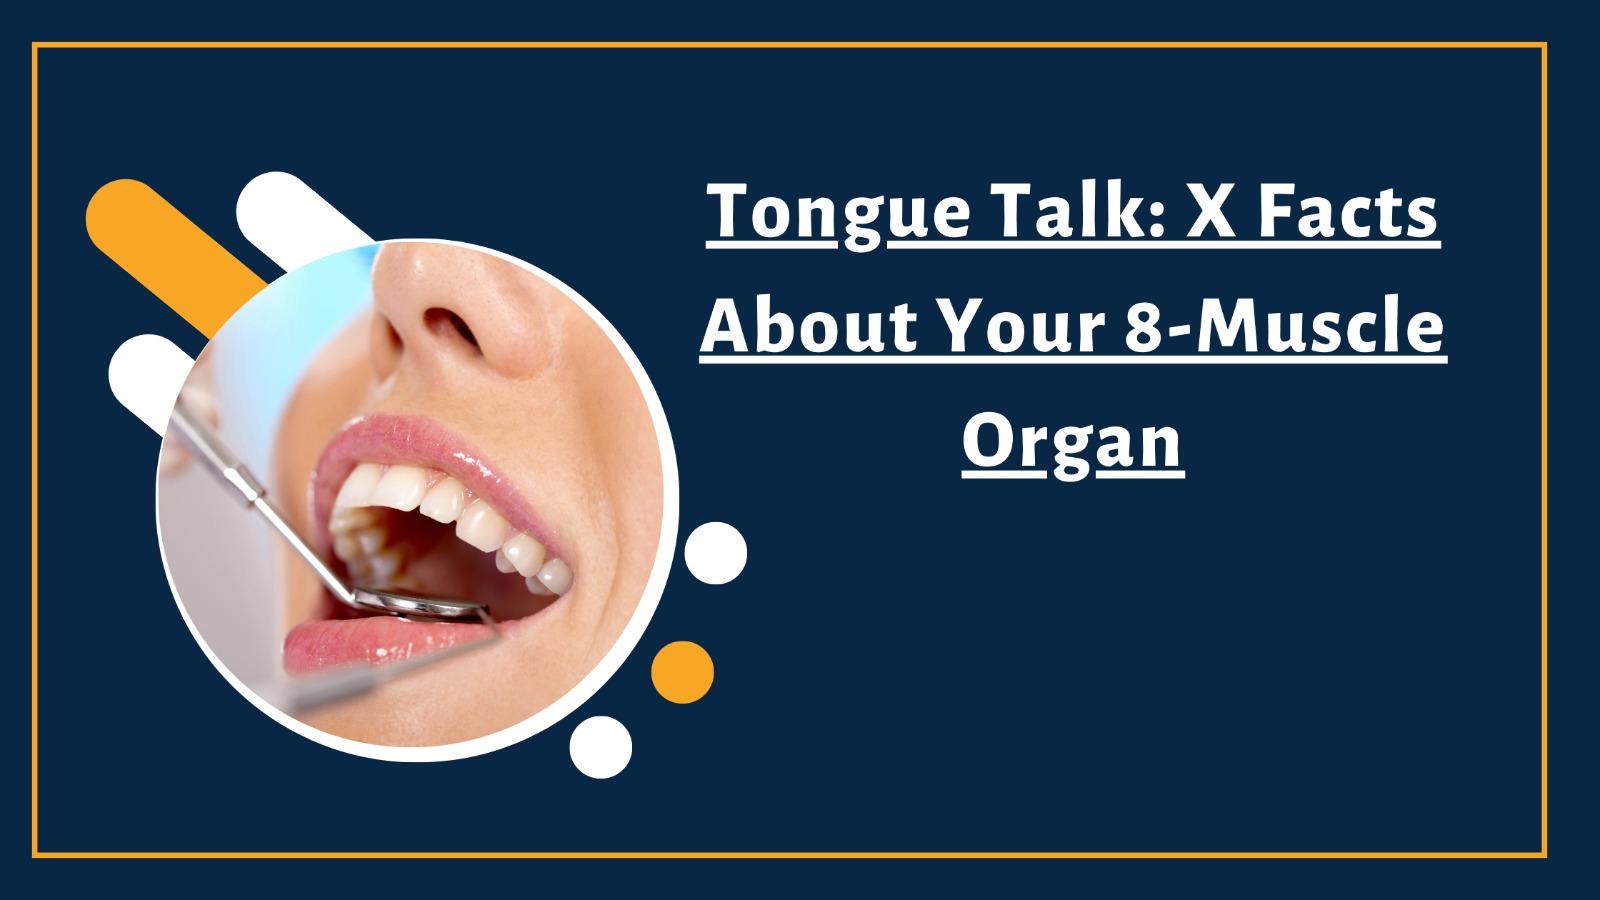 Tongue Talk: X Facts About Your 8-Muscle Organ